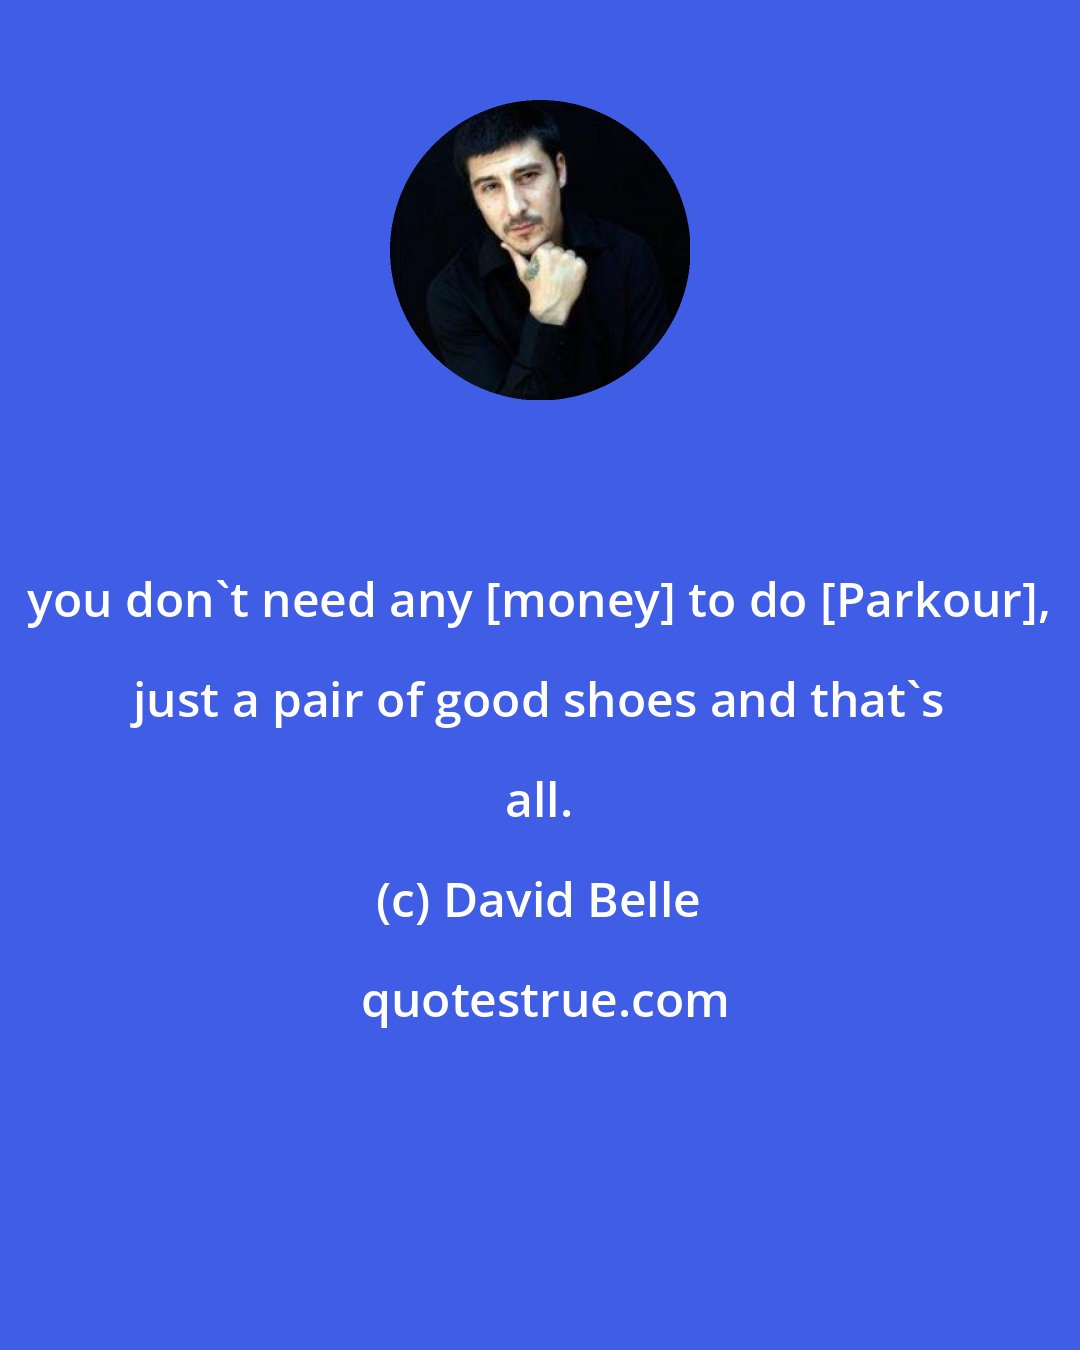 David Belle: you don't need any [money] to do [Parkour], just a pair of good shoes and that's all.